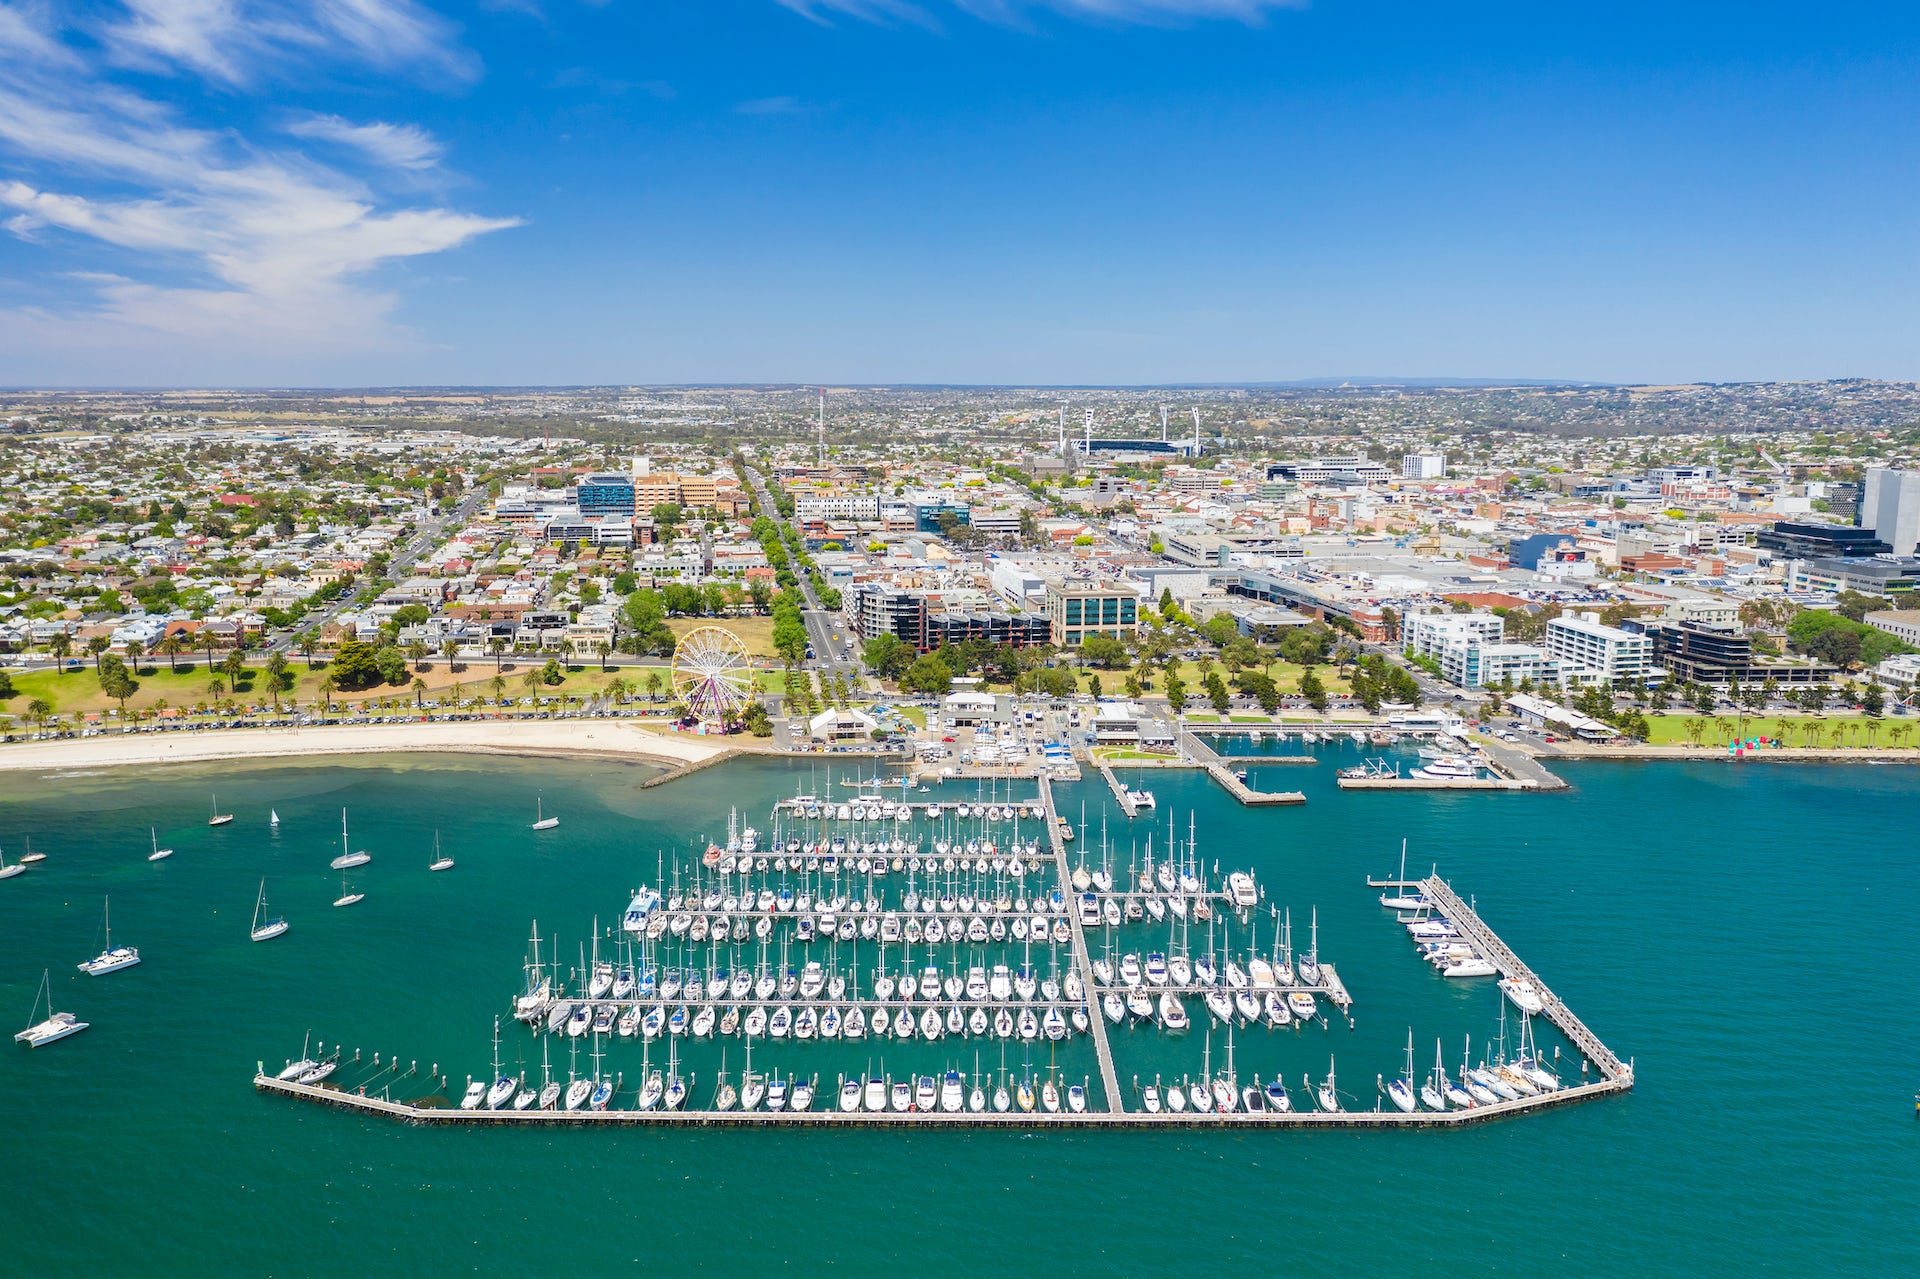 aerial view of Geelong looking inland from the bay